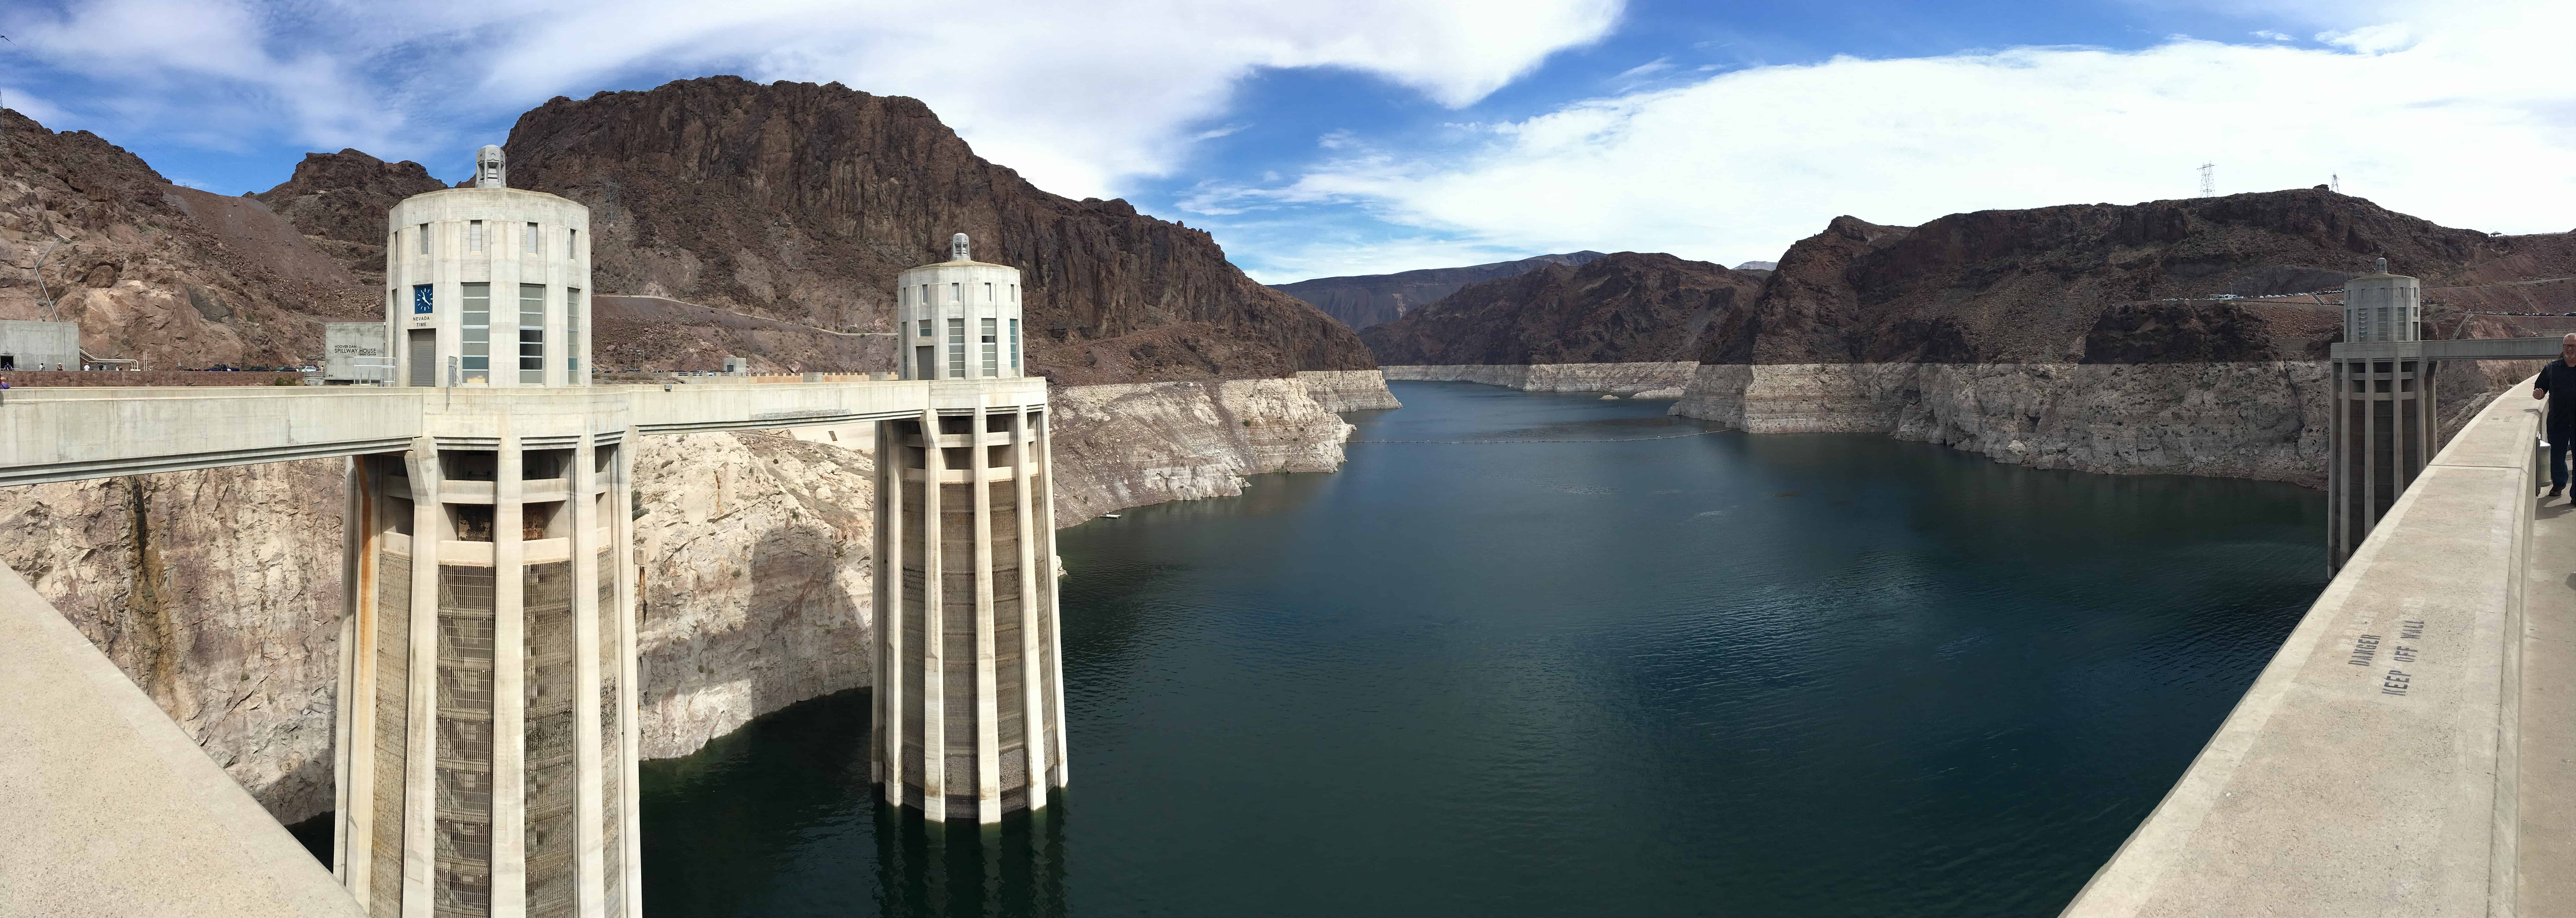 Panoramic view from the back side of the dam at Hoover Dam in Nevada